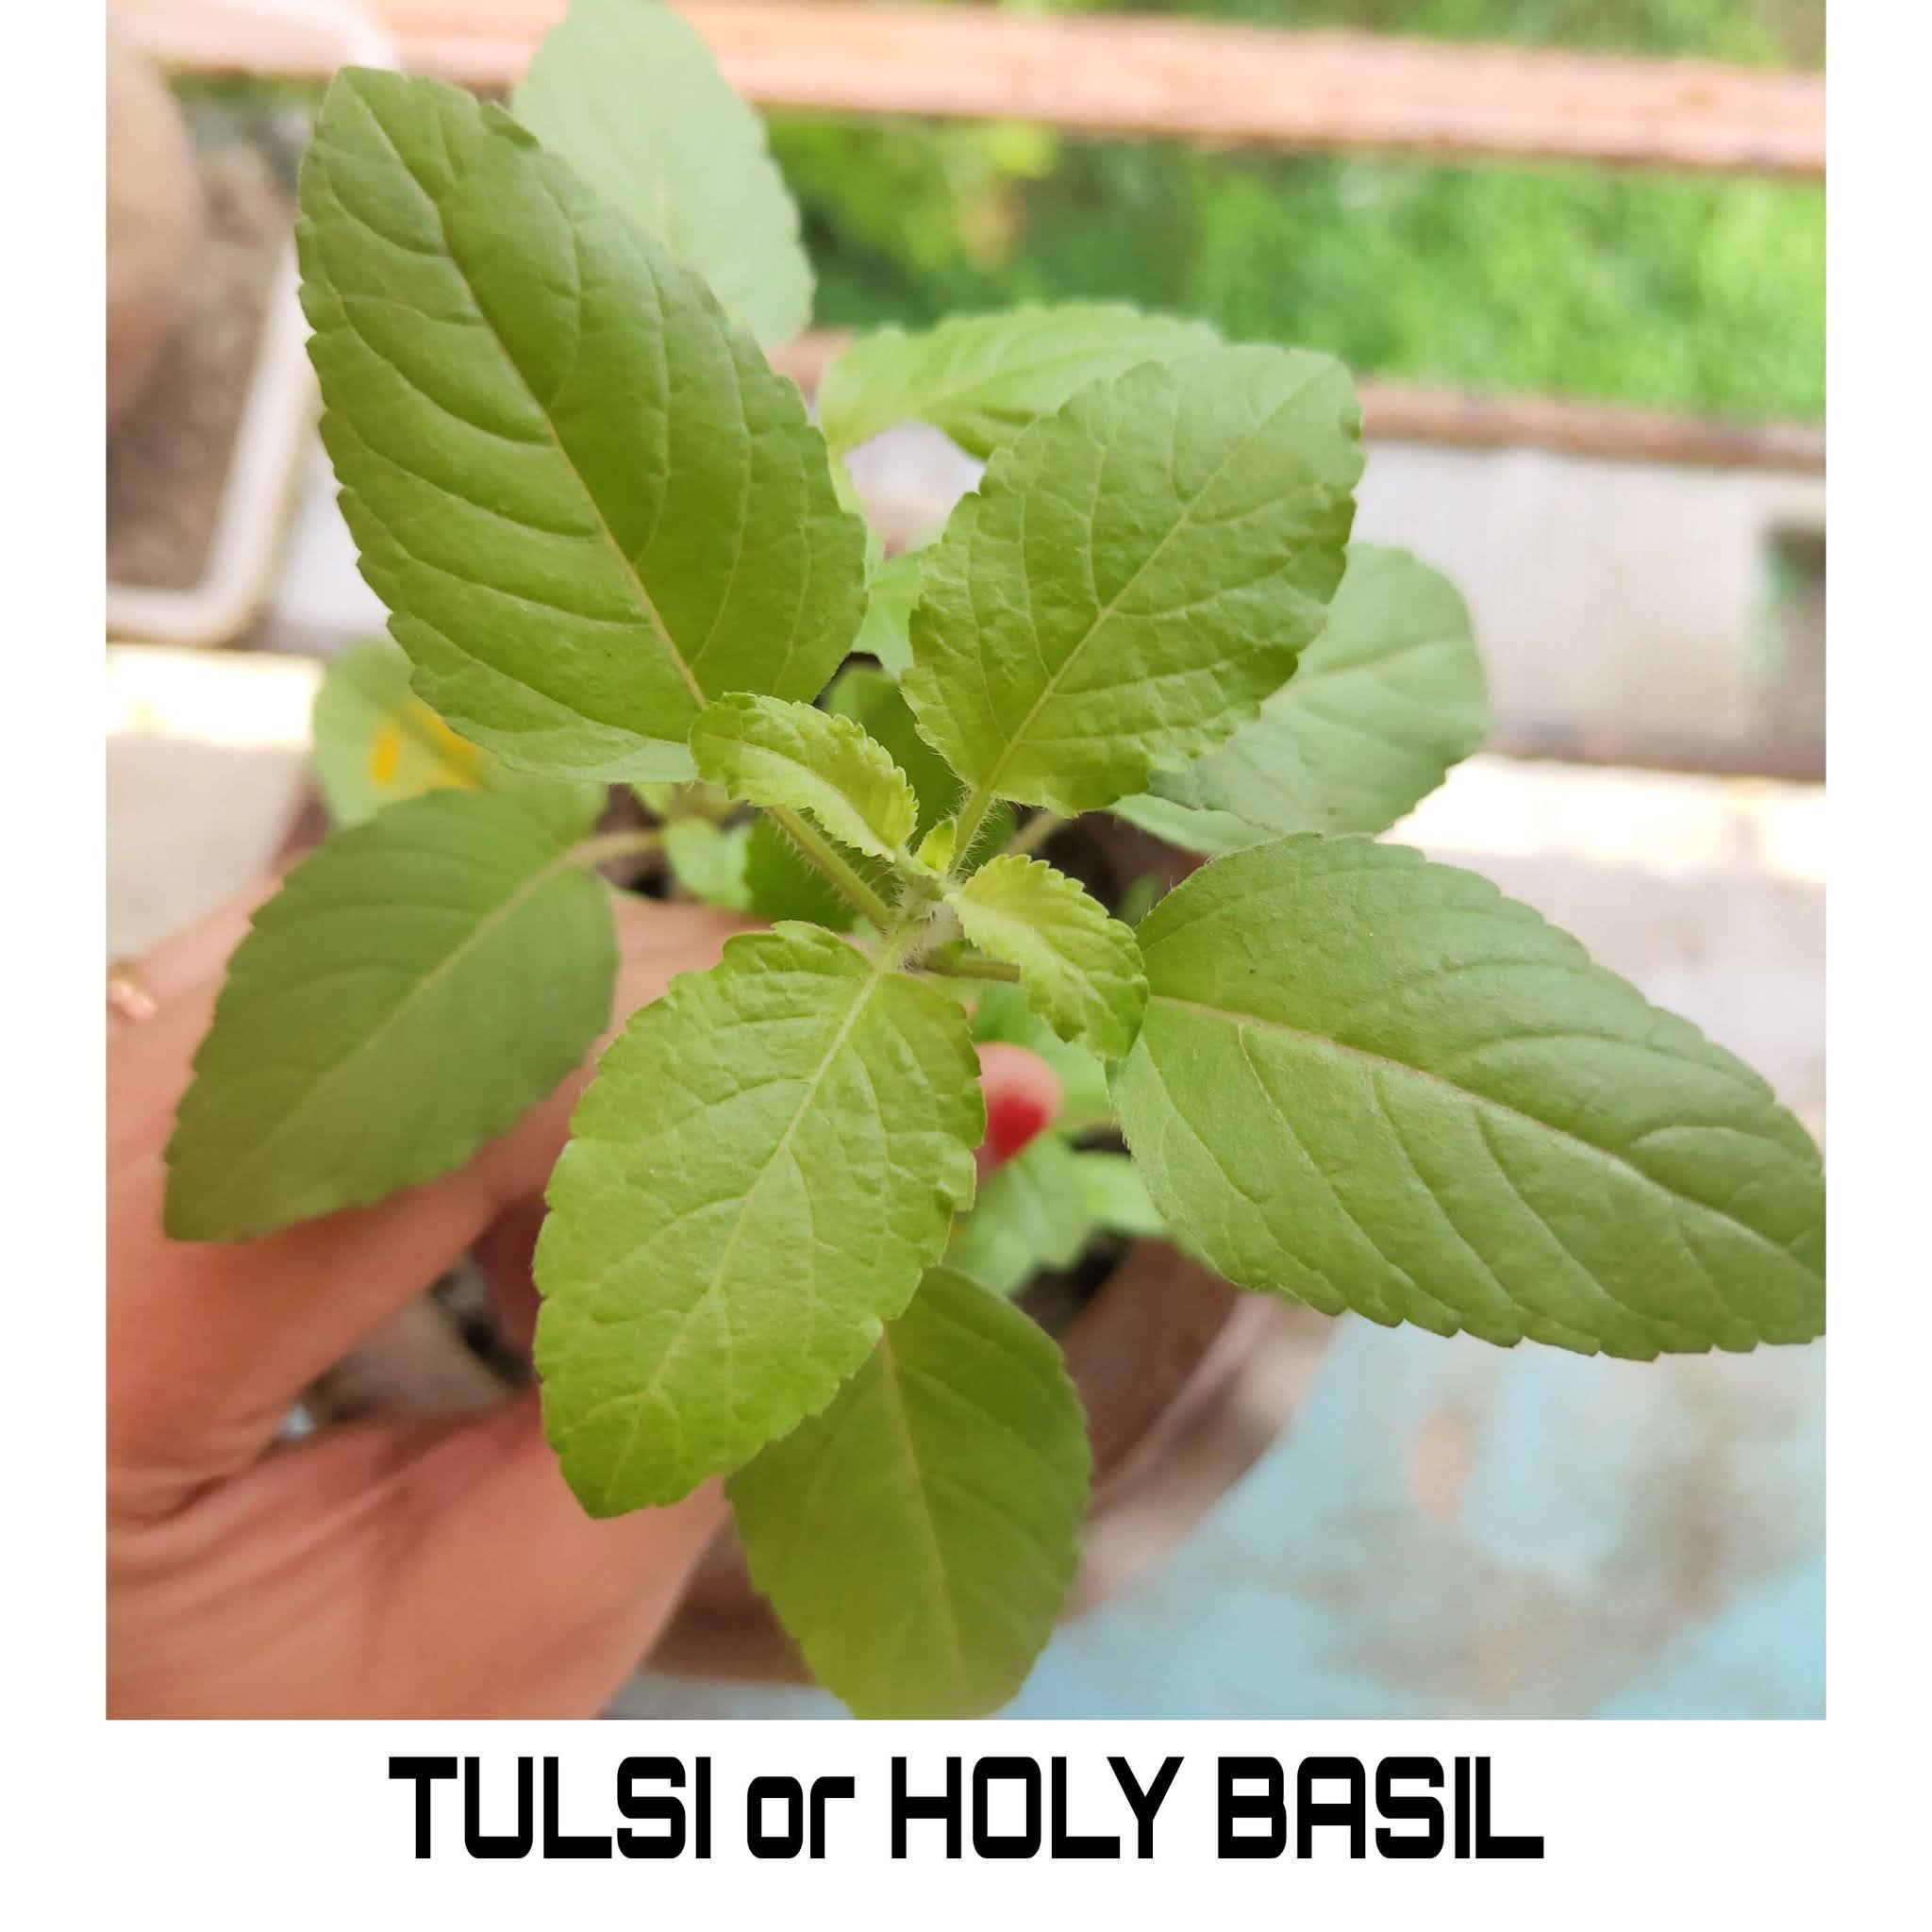 Tulsi Leaves have medicinal properties. This is one of the Top 5 medicinal plants that every household should have